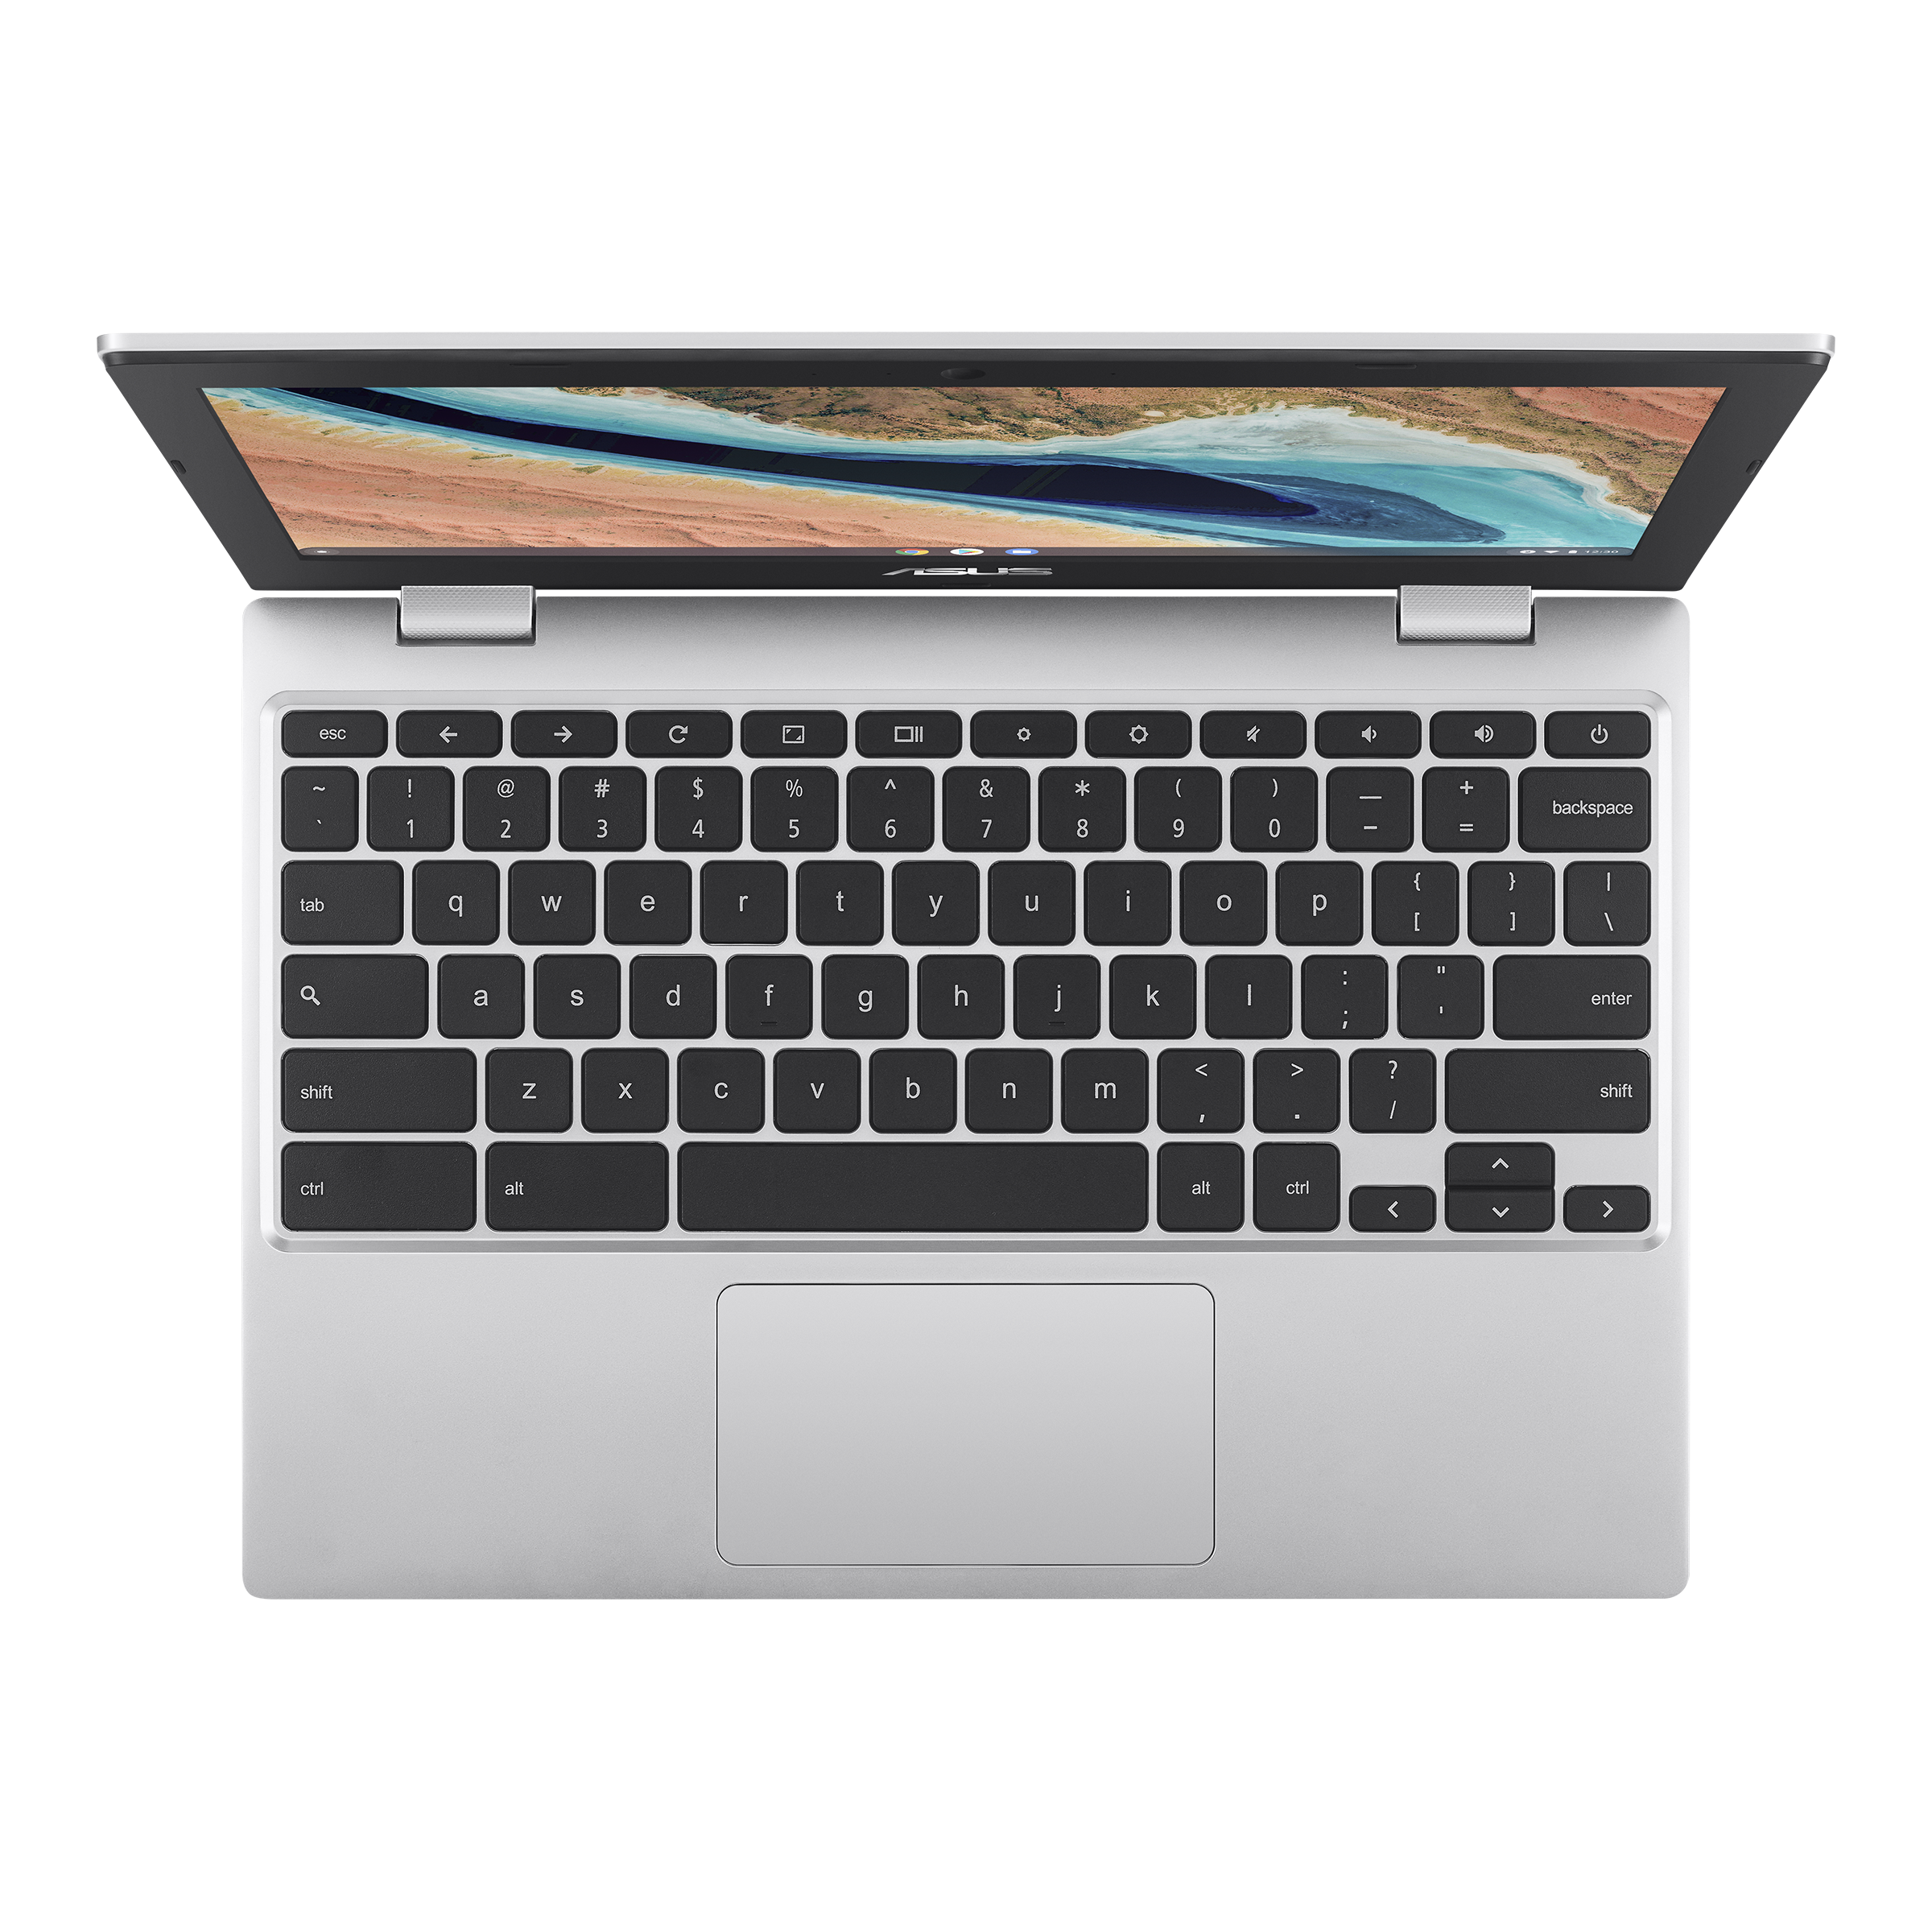 ASUS Chromebook CX1 (CX1101)｜Laptops For Home｜ASUS Global